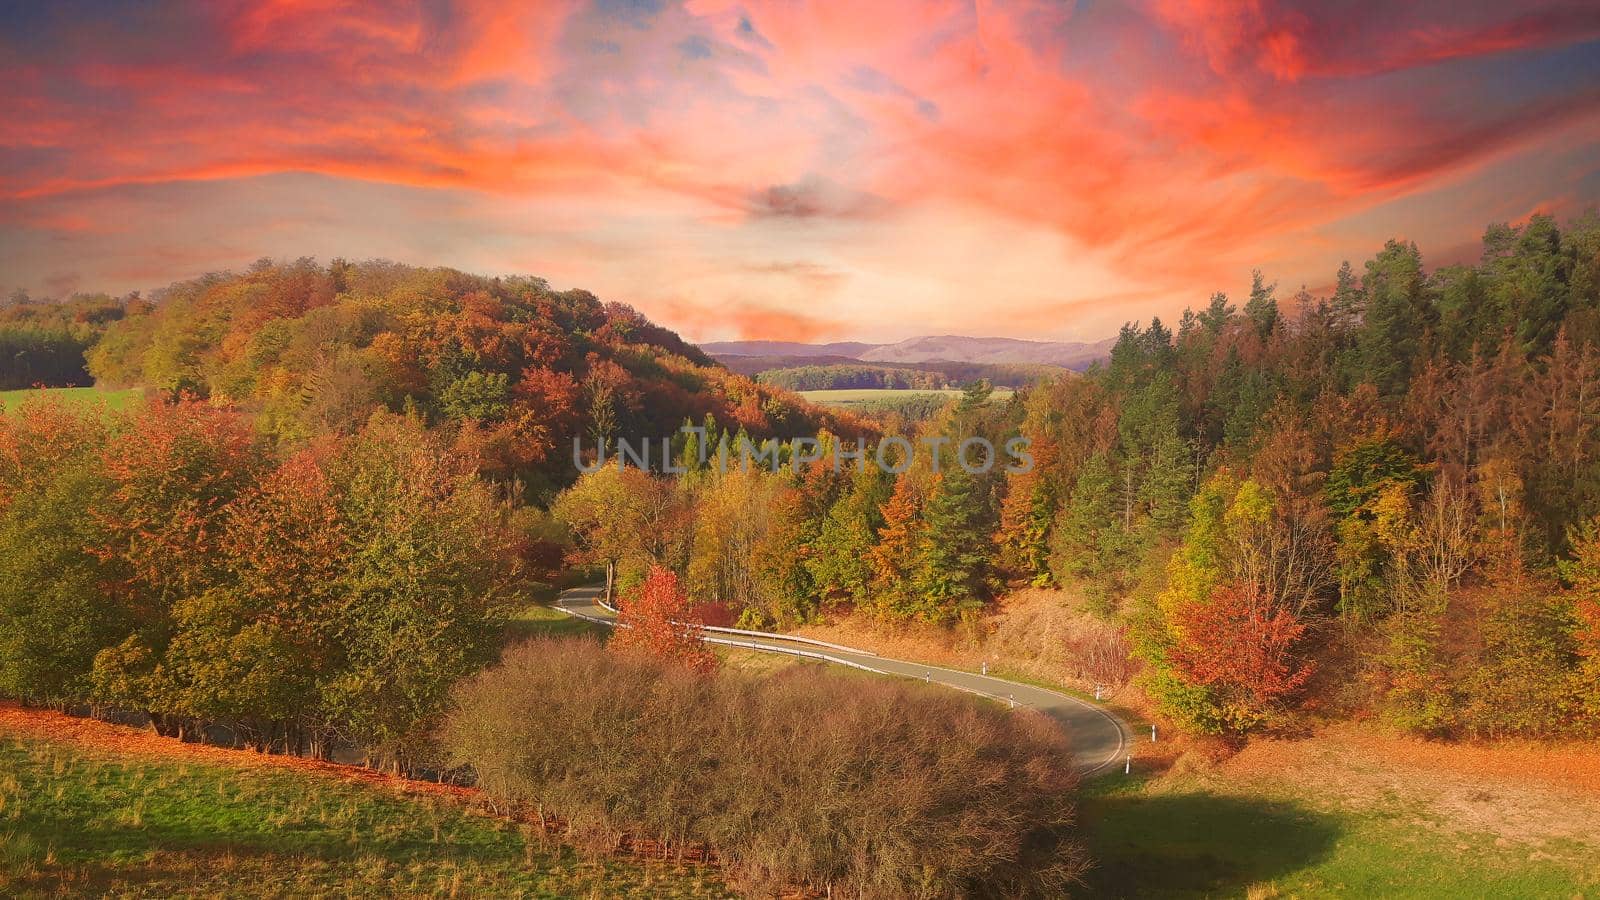 Colorful autumn scene in the mountains at sunset by banate